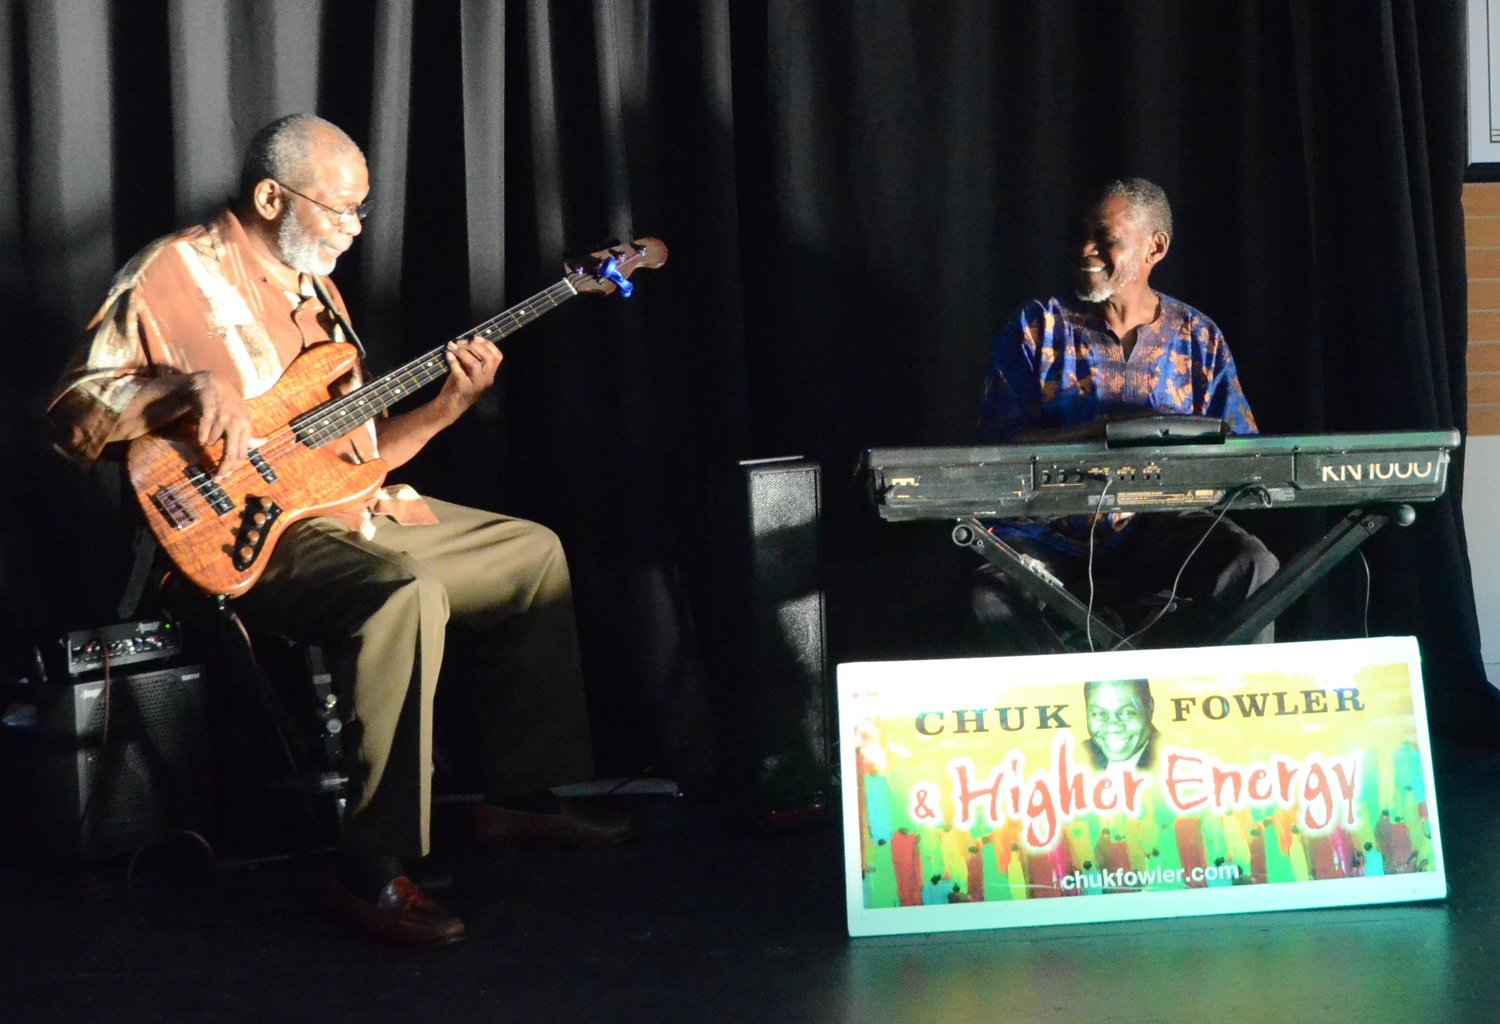 Paul Ramsey, left, and Chuk Fowler drew their audiences into a cloud of welcoming sounds at the Sparkle on Stage Cultural Arts Center, where they perform every Wednesday night.